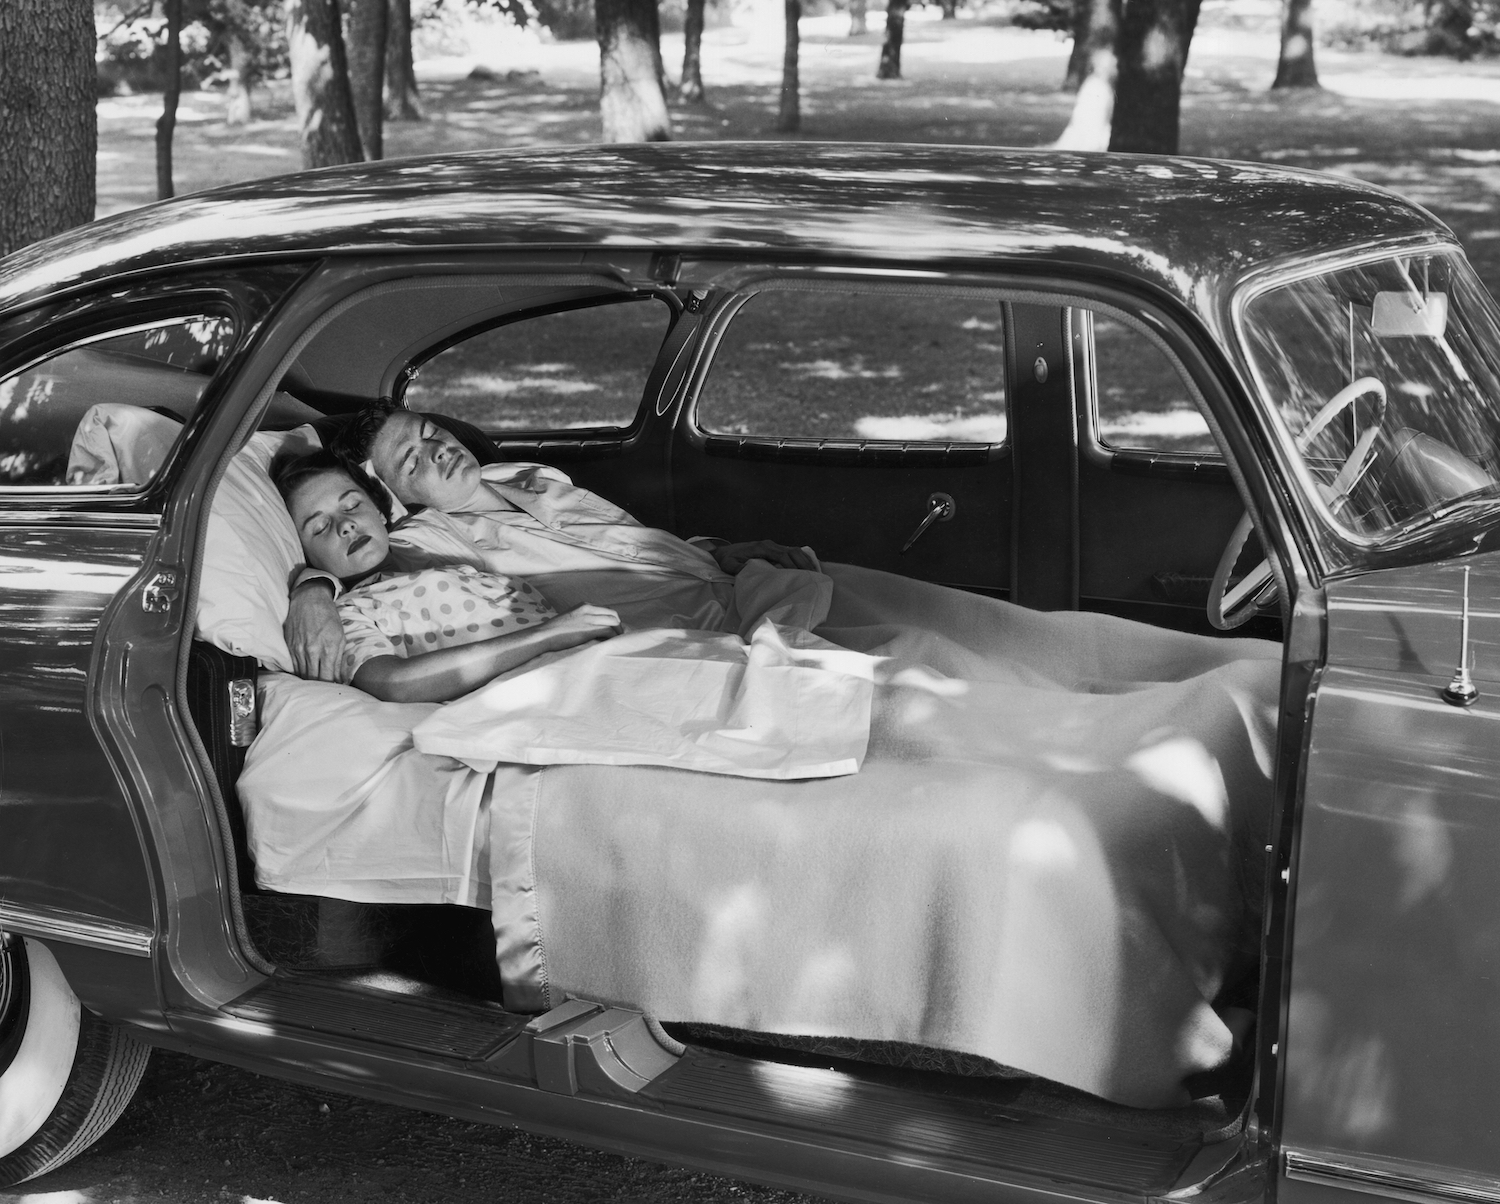 This 1949 Nash was engineered with fold-flat seats. You can park and sleep in your car if you are not breaking any local laws. There is no federal law against sleeping in your car--in a legal parking spot. |  FPG/Hulton Archive/Getty Images